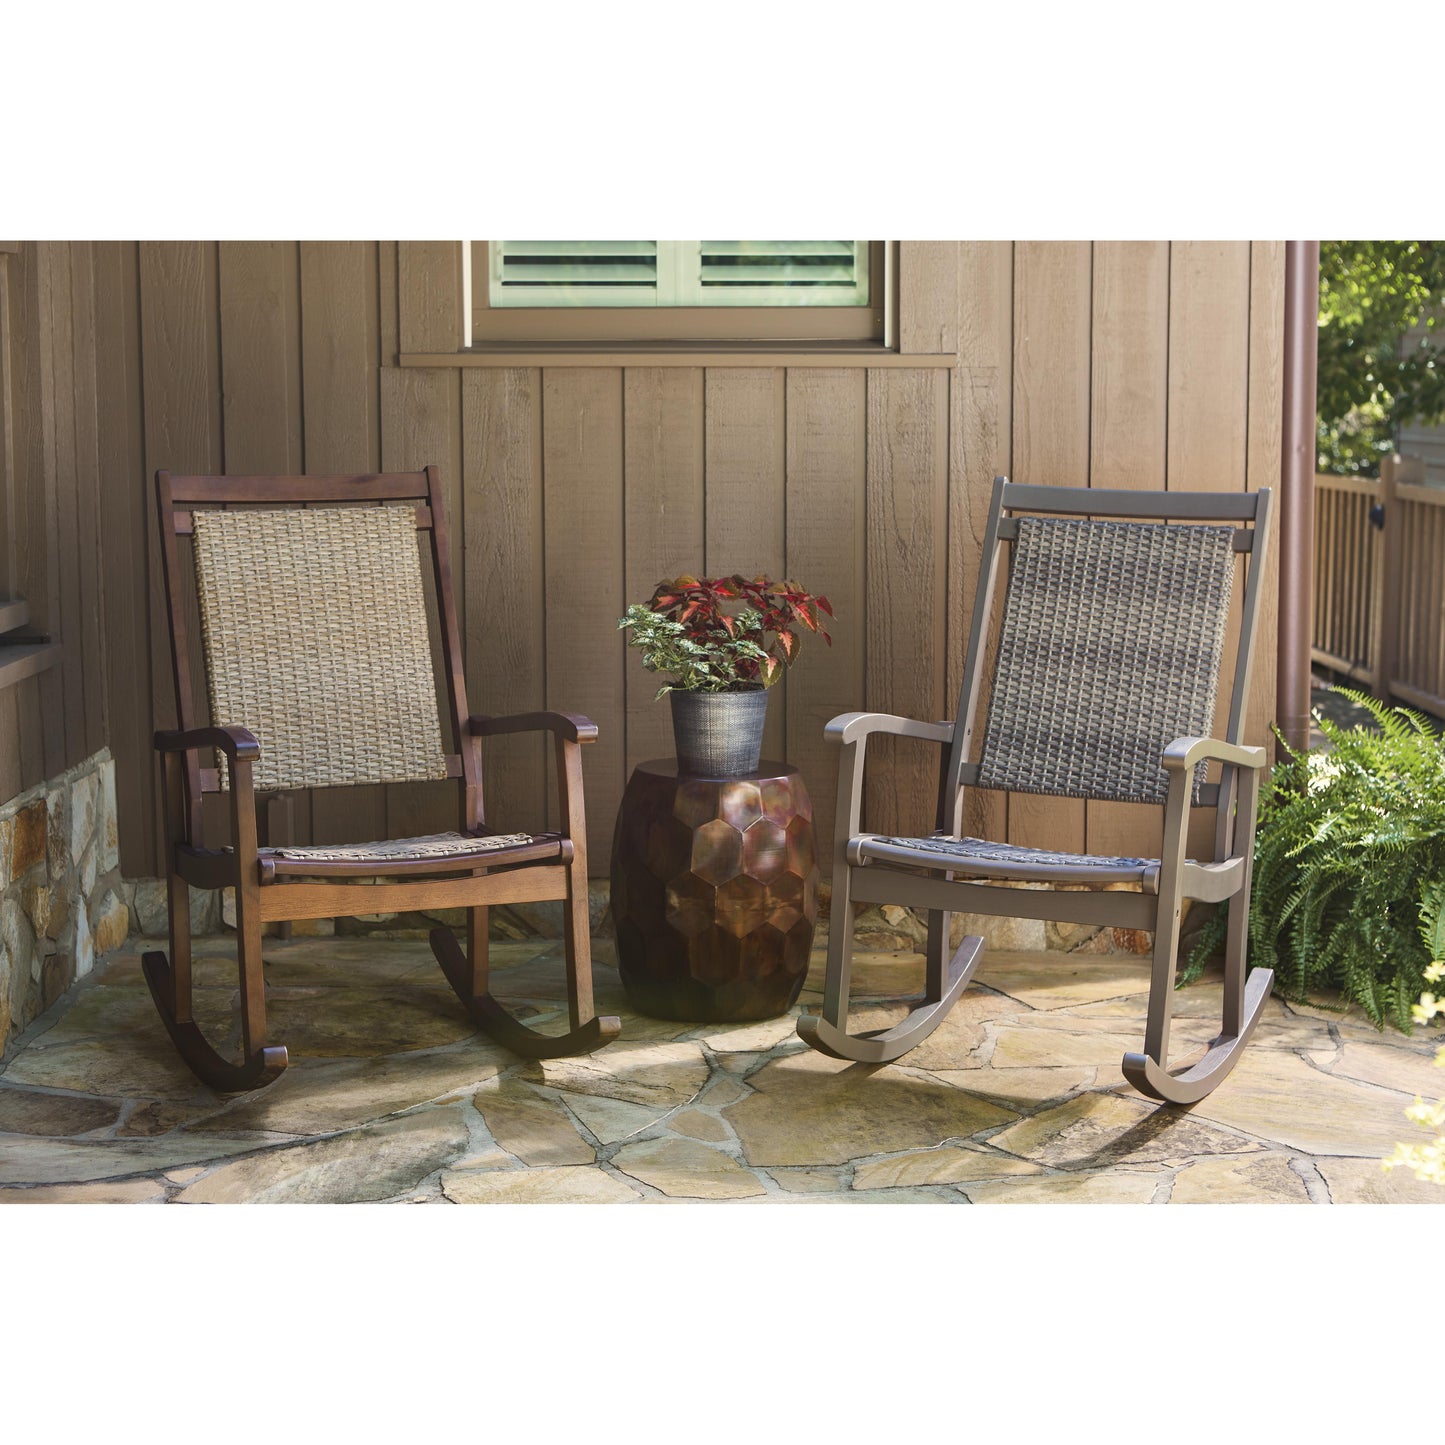 Signature Design by Ashley Outdoor Seating Rocking Chairs P168-827 IMAGE 8